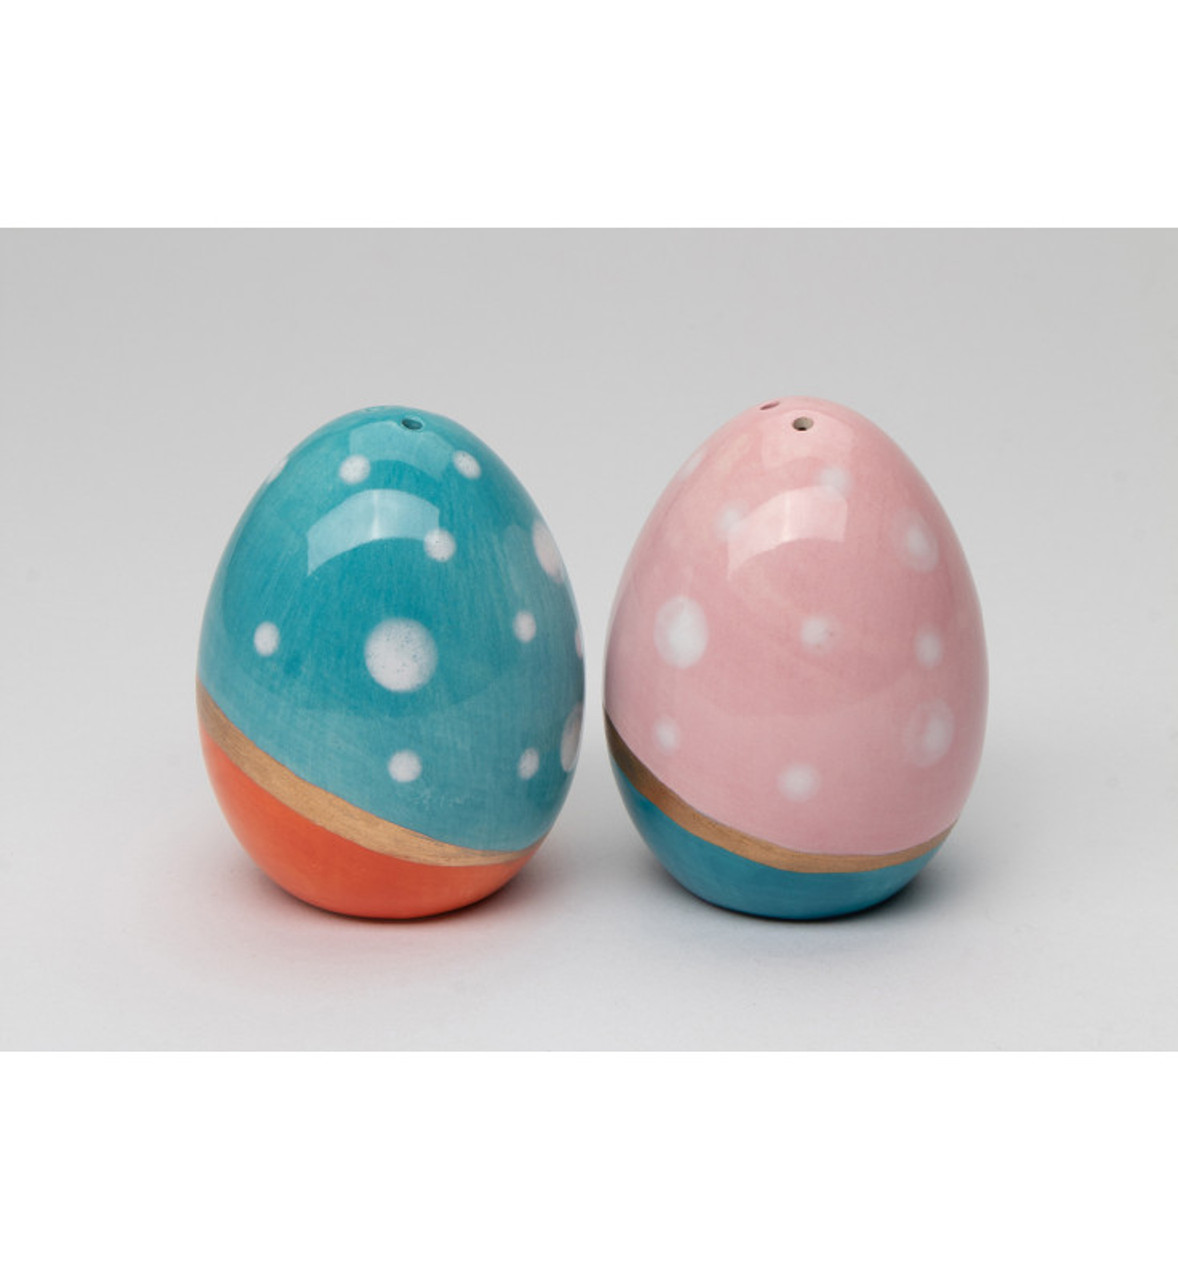 https://cdn11.bigcommerce.com/s-oo0gdojvjo/images/stencil/1280x1280/products/80701/148810/21050-easter-pink-and-blue-egg-porcelain-salt-and-pepper-shakers-set-of-4__25395.1701678818.jpg?c=2